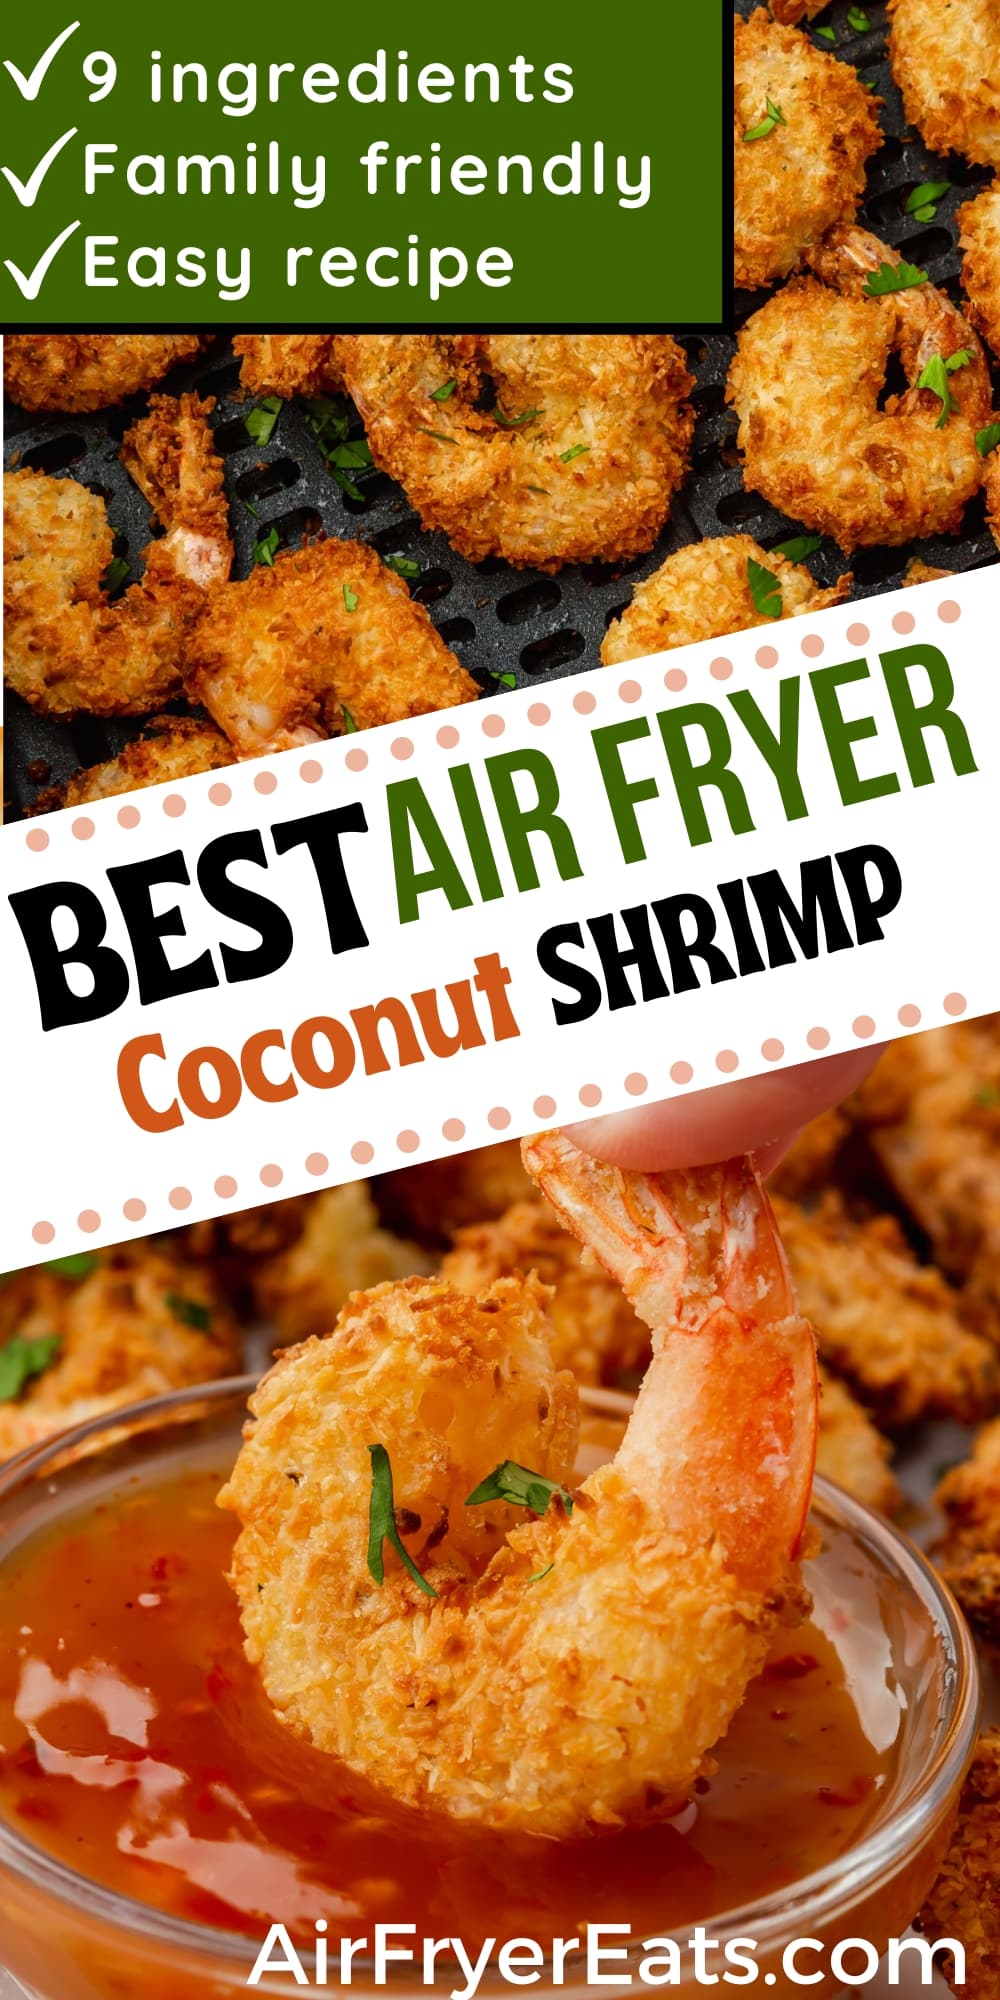 Air Fryer Coconut Shrimp is super crispy, breaded with coconut flakes and panko bread crumbs, and cooks up juicy and flavorful with just a small amount of oil. via @vegetarianmamma